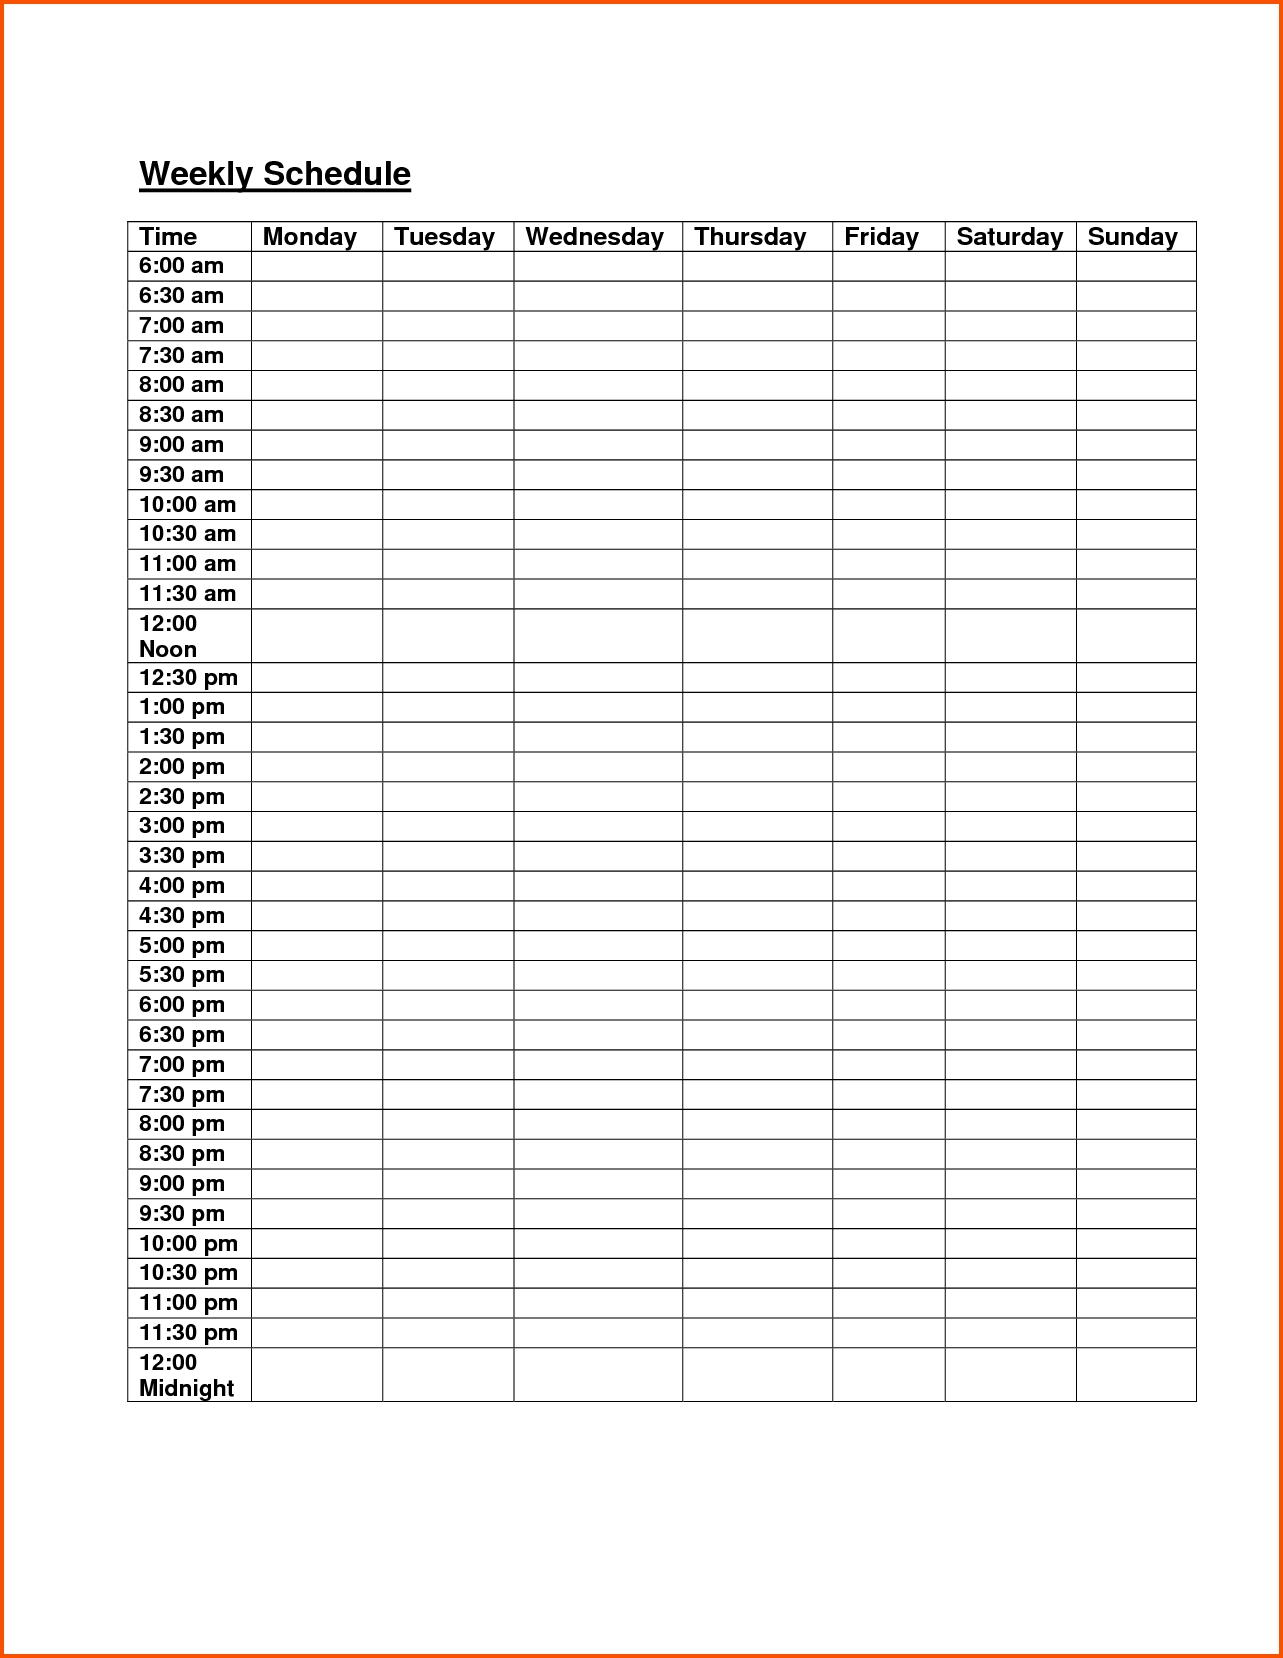 Free Weekly Class Schedule Template Excel #1 | Those Who Can, Teach  Homework Agenda Template 7Th Grade